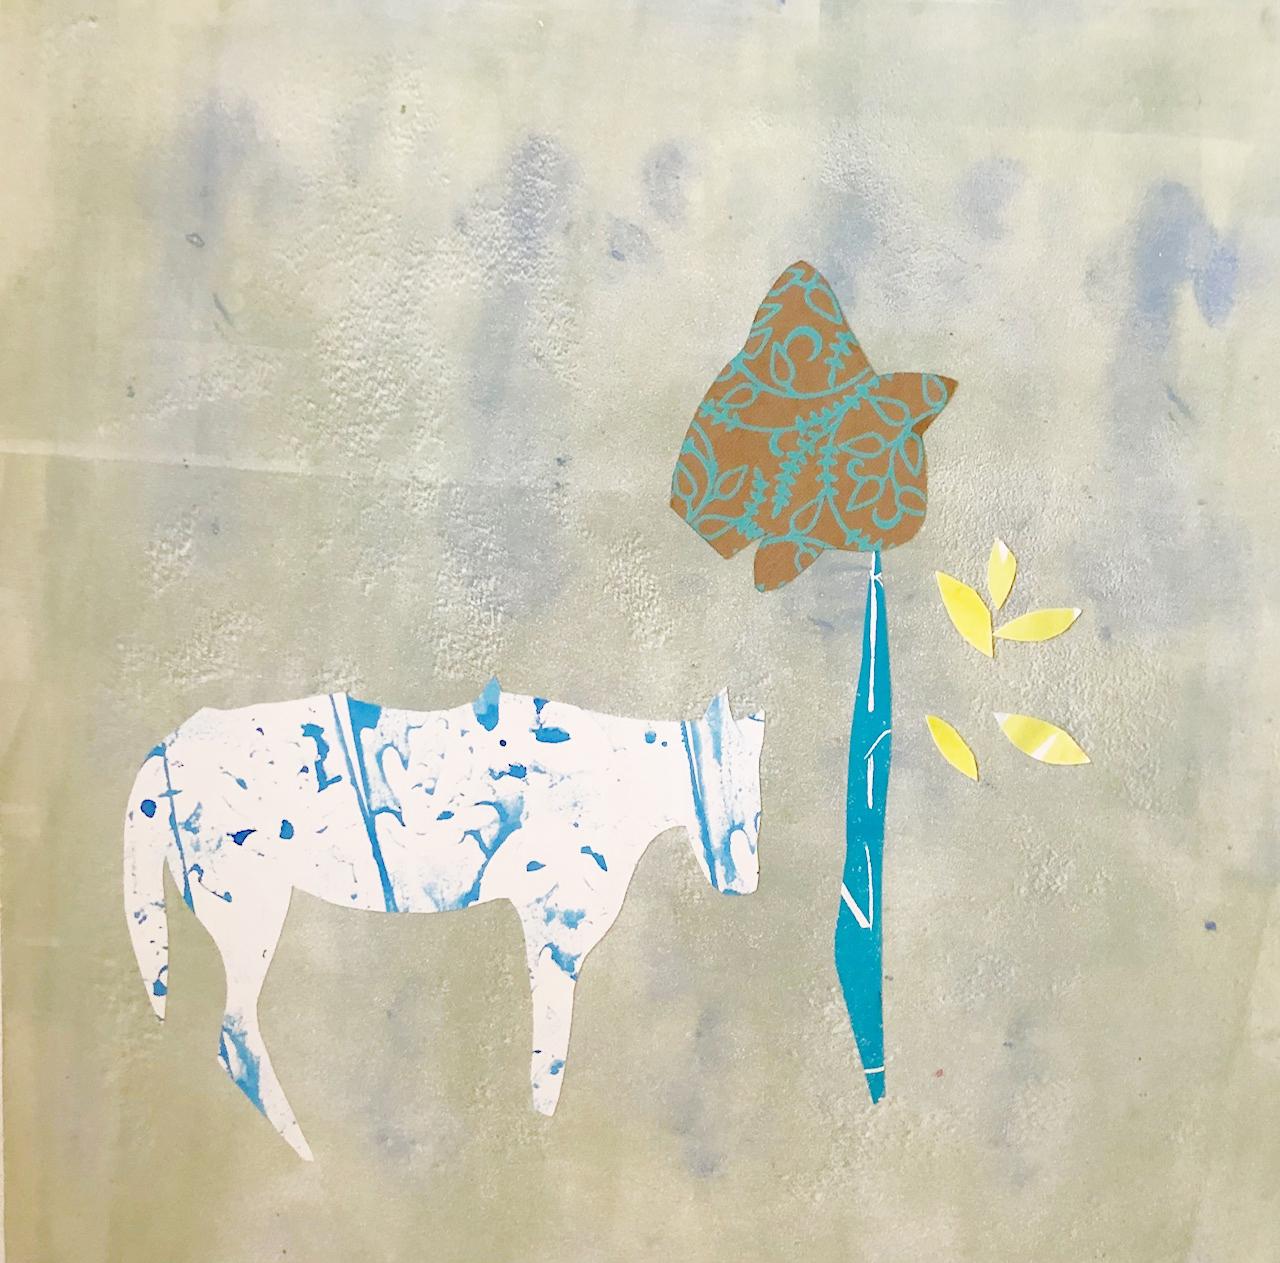 At Rest, Monotype, Cow, Framed 23x23, 1 of 1 Monotype,  Free Shipping, Framed - Mixed Media Art by Charlotte Seifert